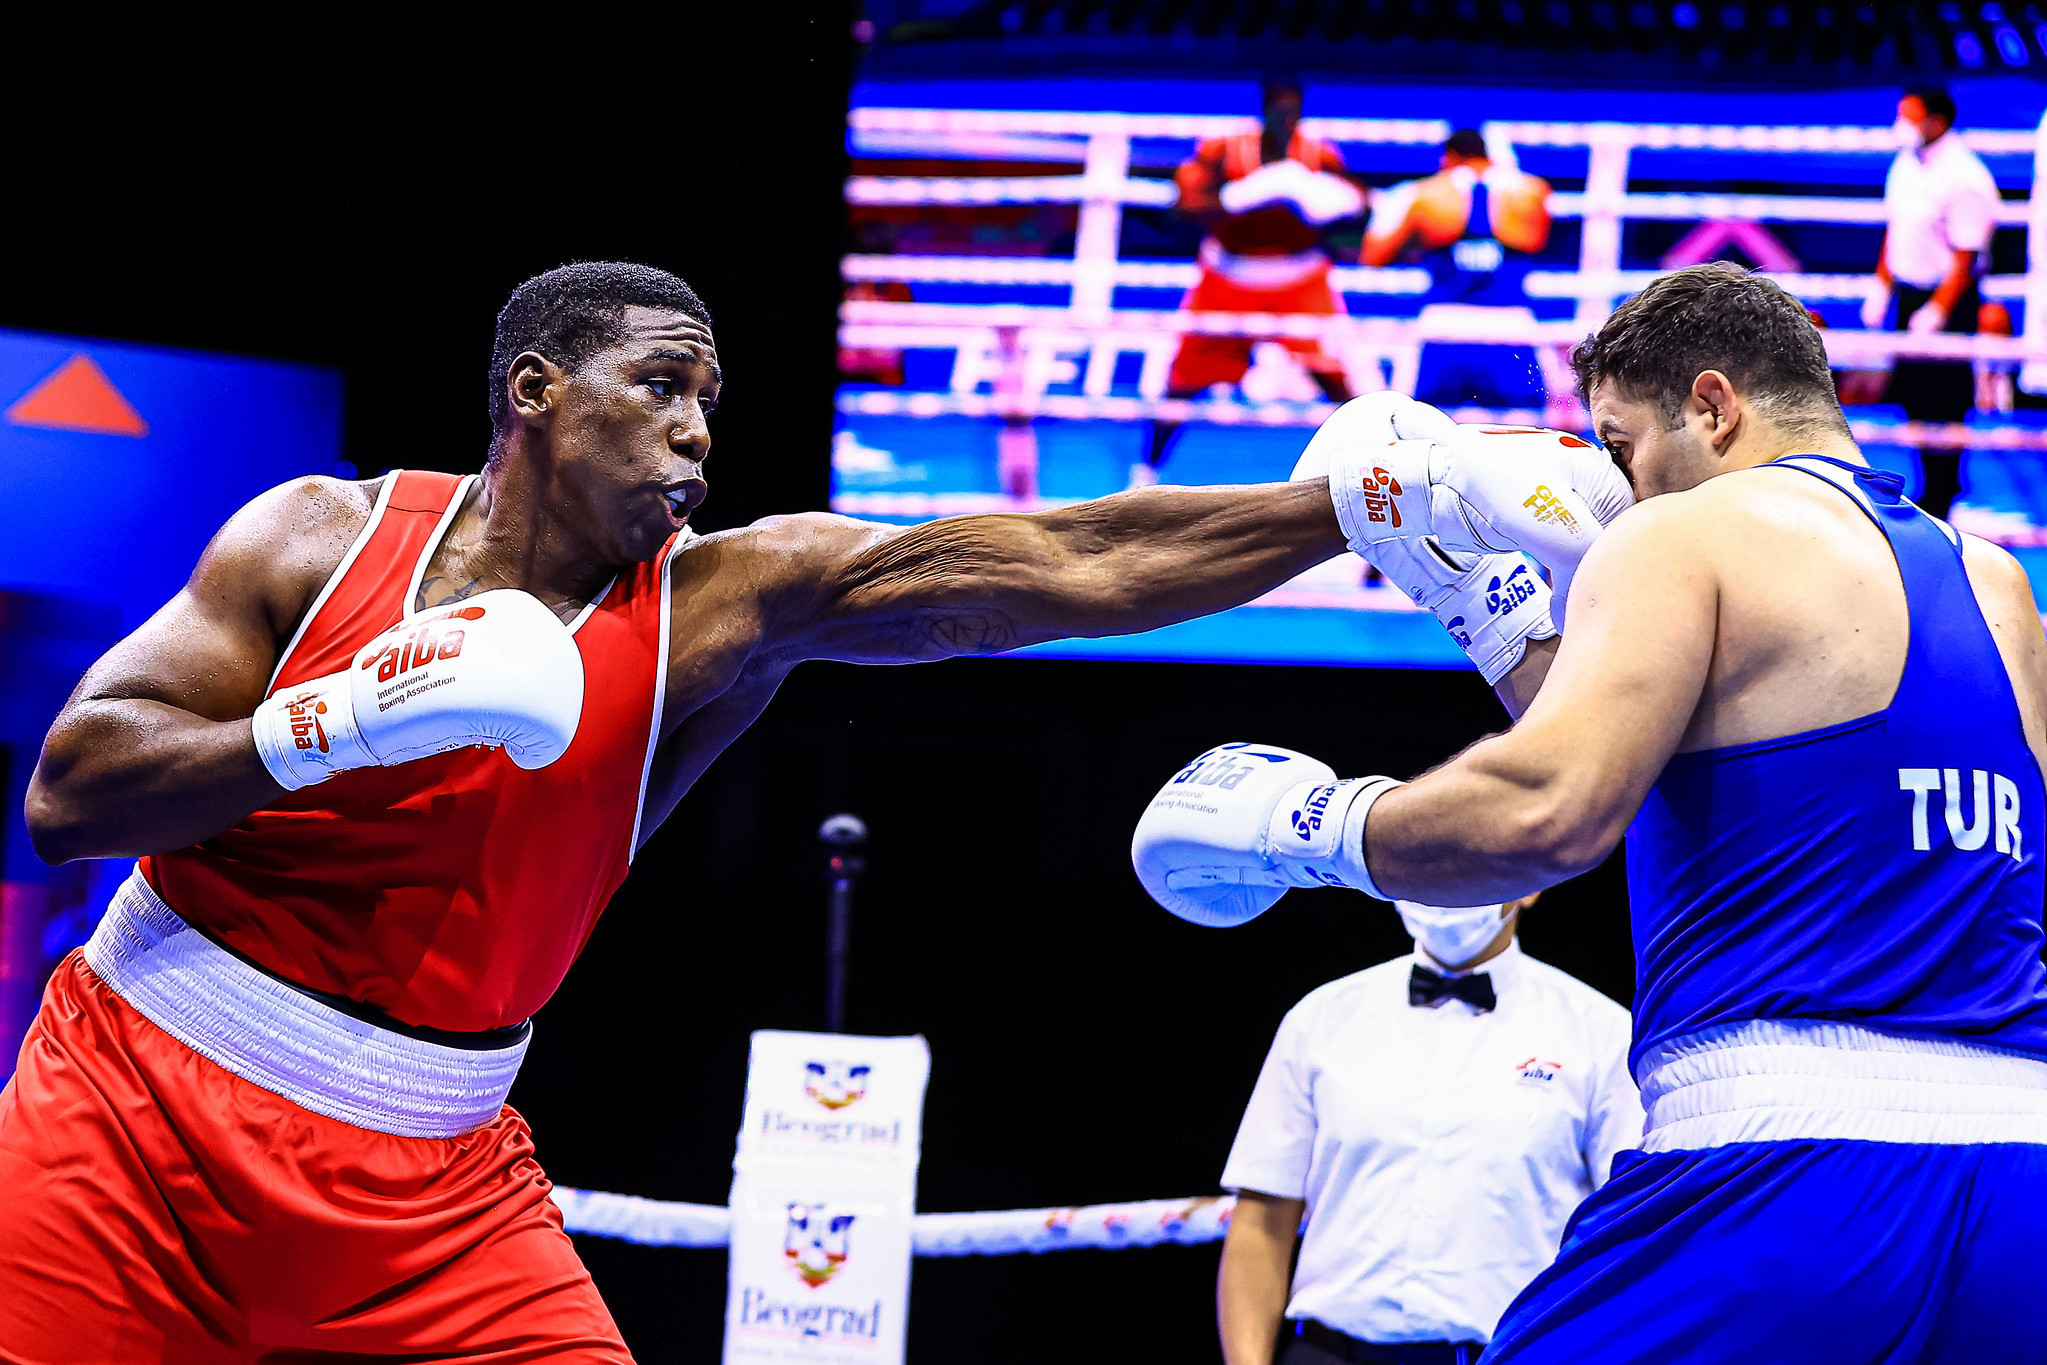 Four nations secure first AIBA Men's World Boxing Championships medals ever